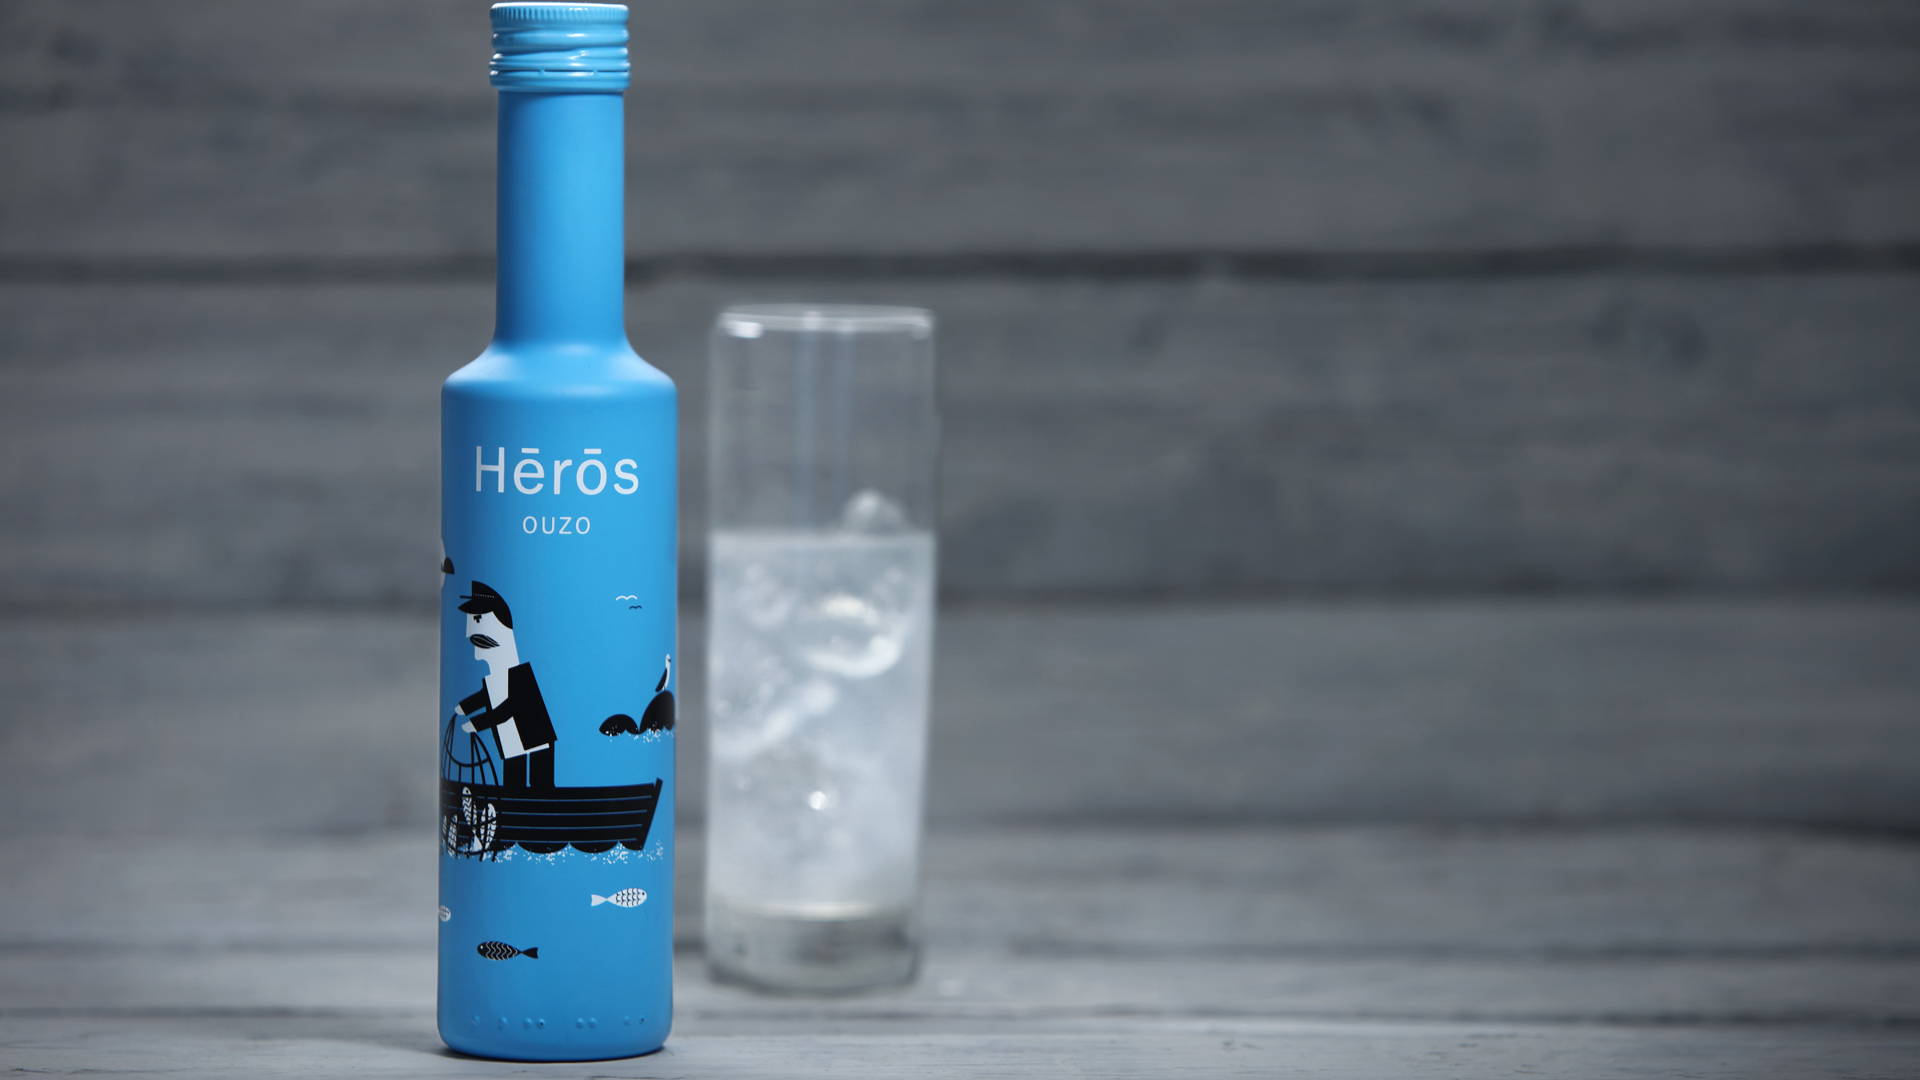 Featured image for This Ouzo Wants To Pay Tribute To a Greek Hero - The Fisherman